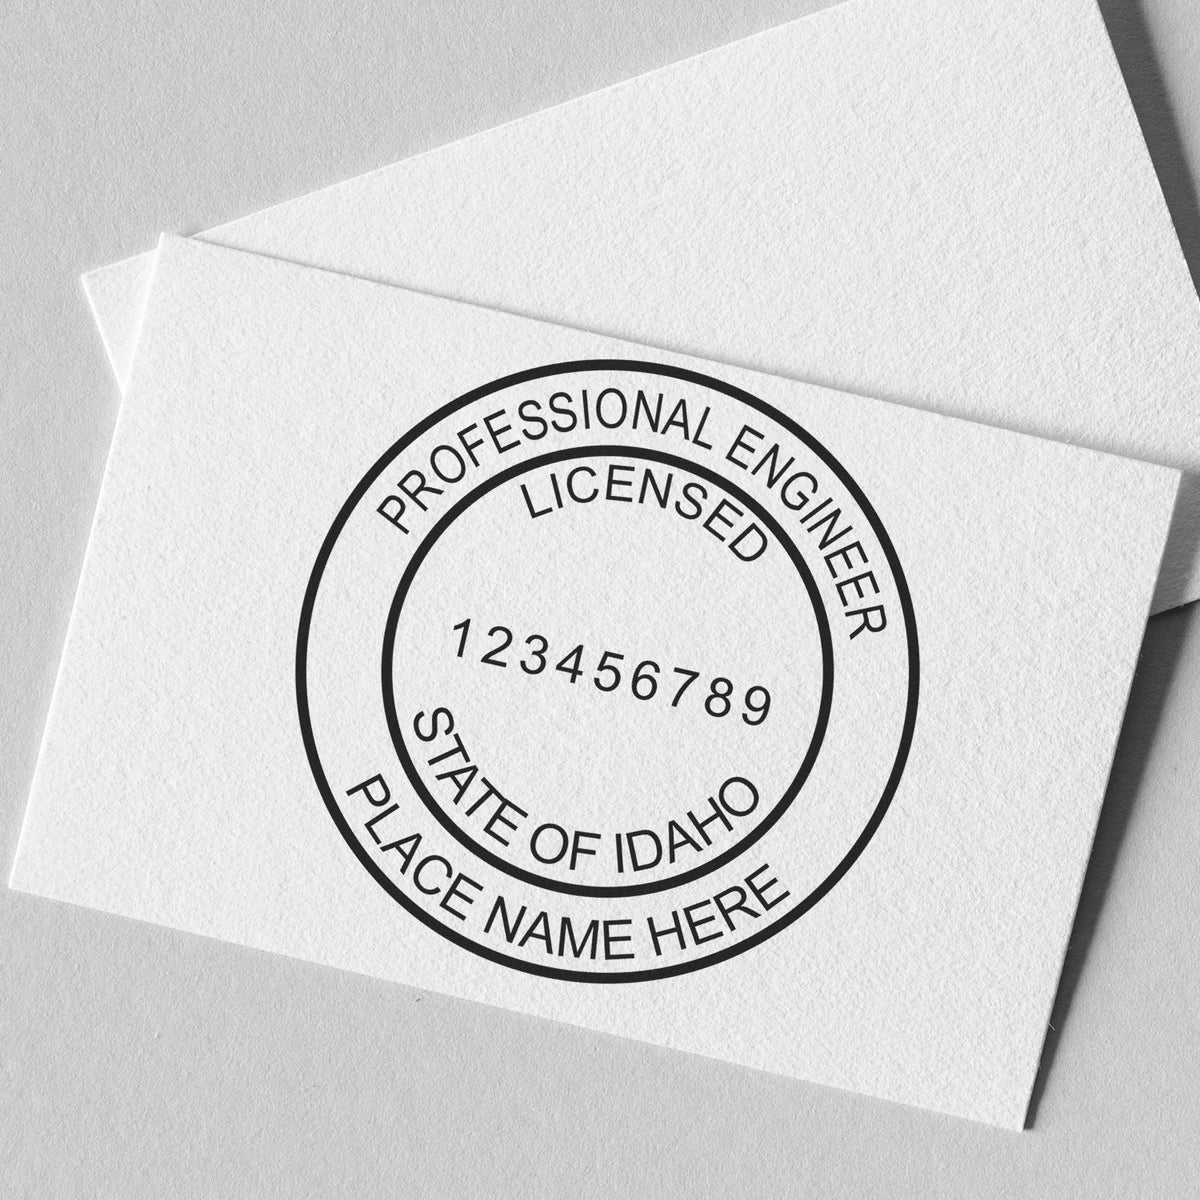 A stamped impression of the Slim Pre-Inked Idaho Professional Engineer Seal Stamp in this stylish lifestyle photo, setting the tone for a unique and personalized product.